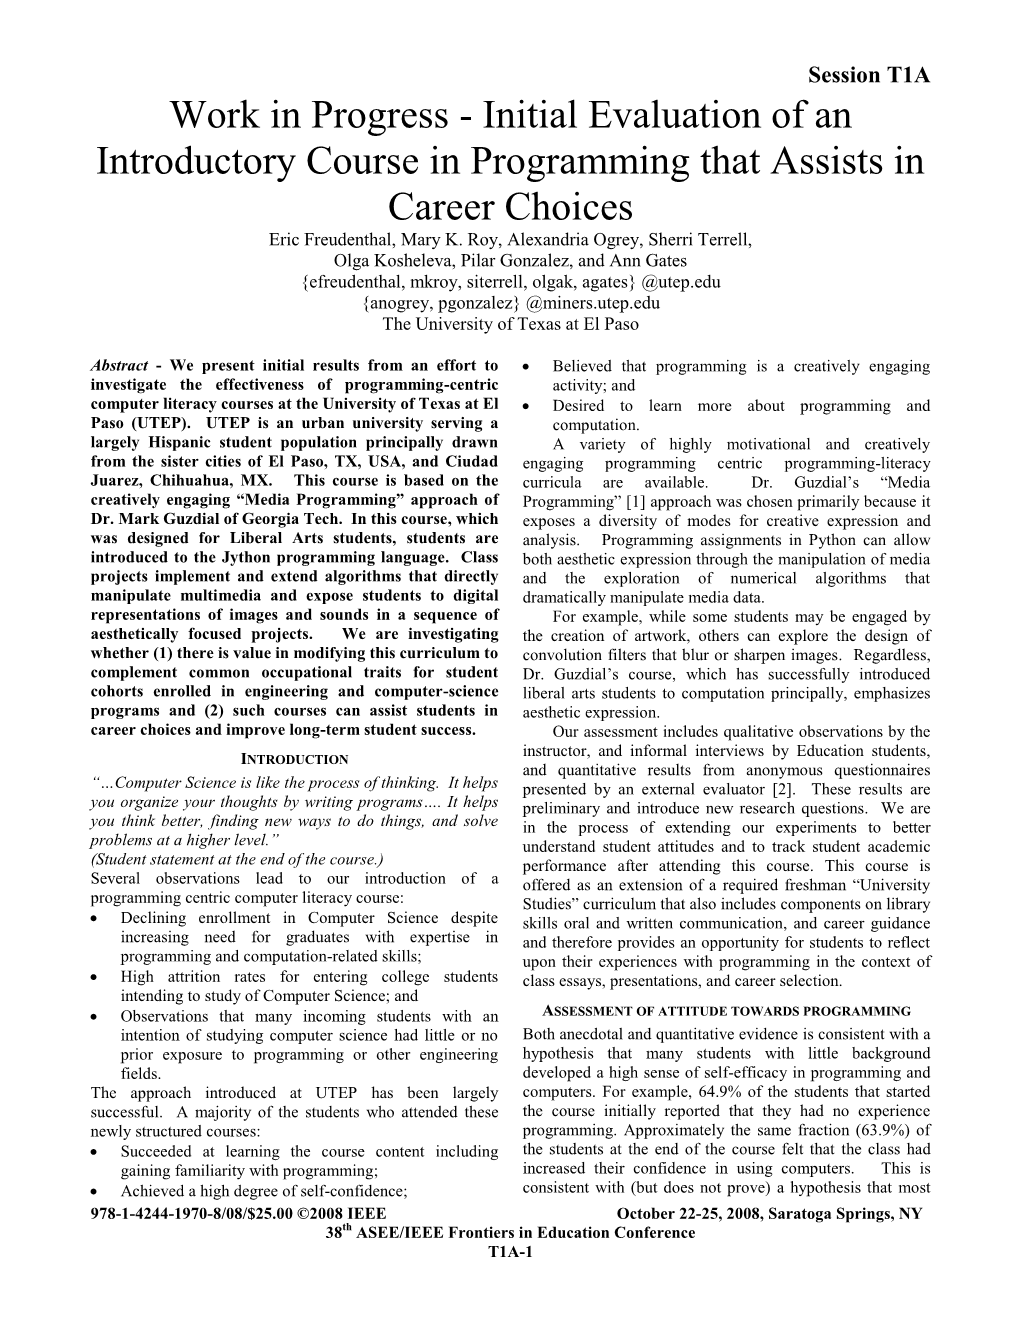 Initial Evaluation of an Introductory Course in Programming That Assists in Career Choices Eric Freudenthal, Mary K